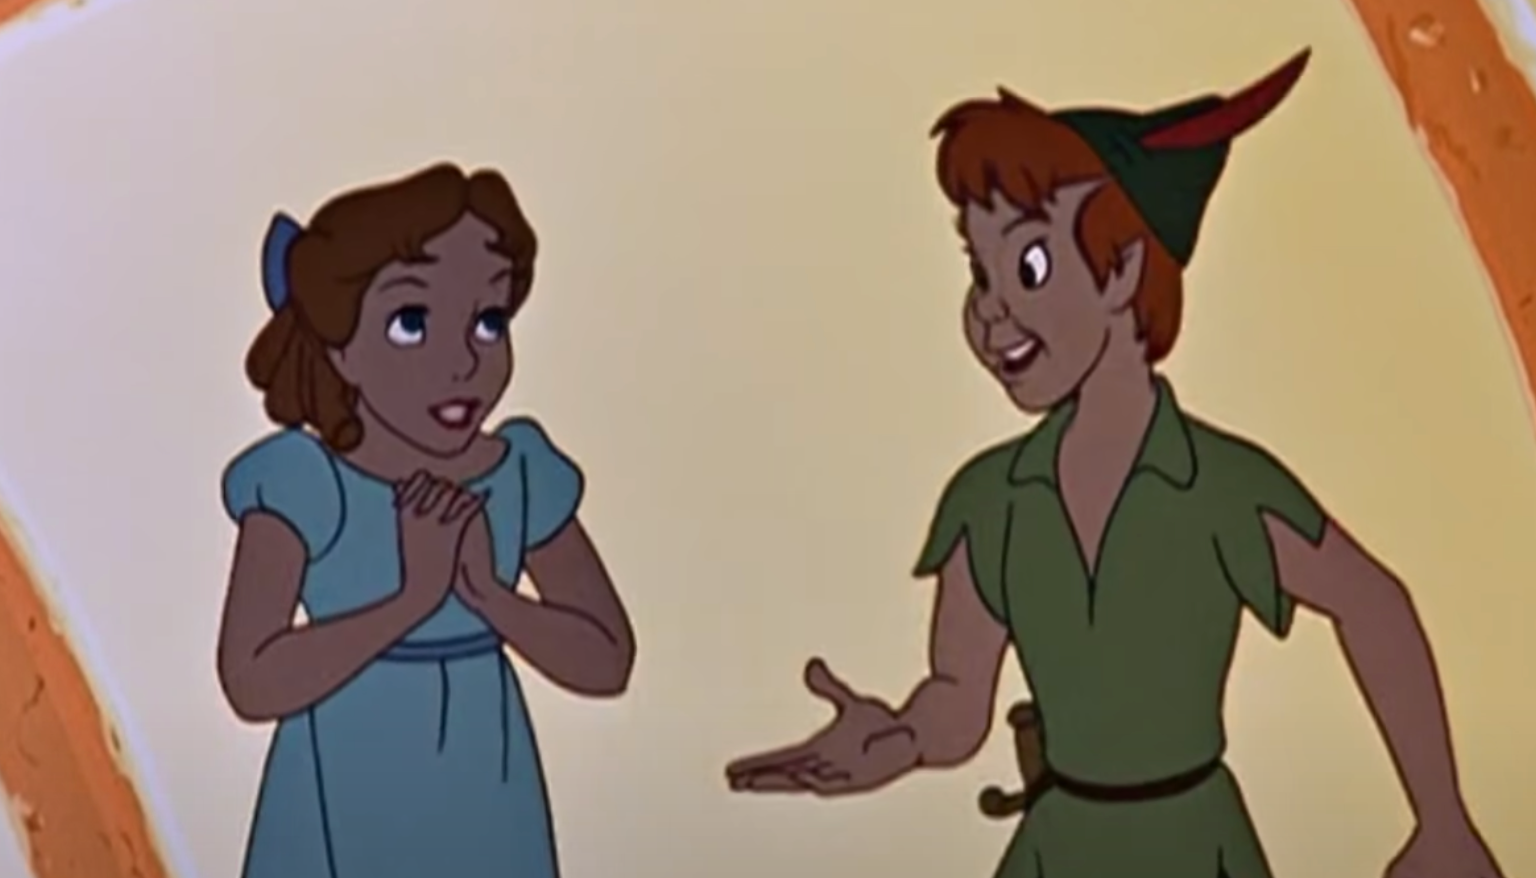 Peter Pan And Wendy